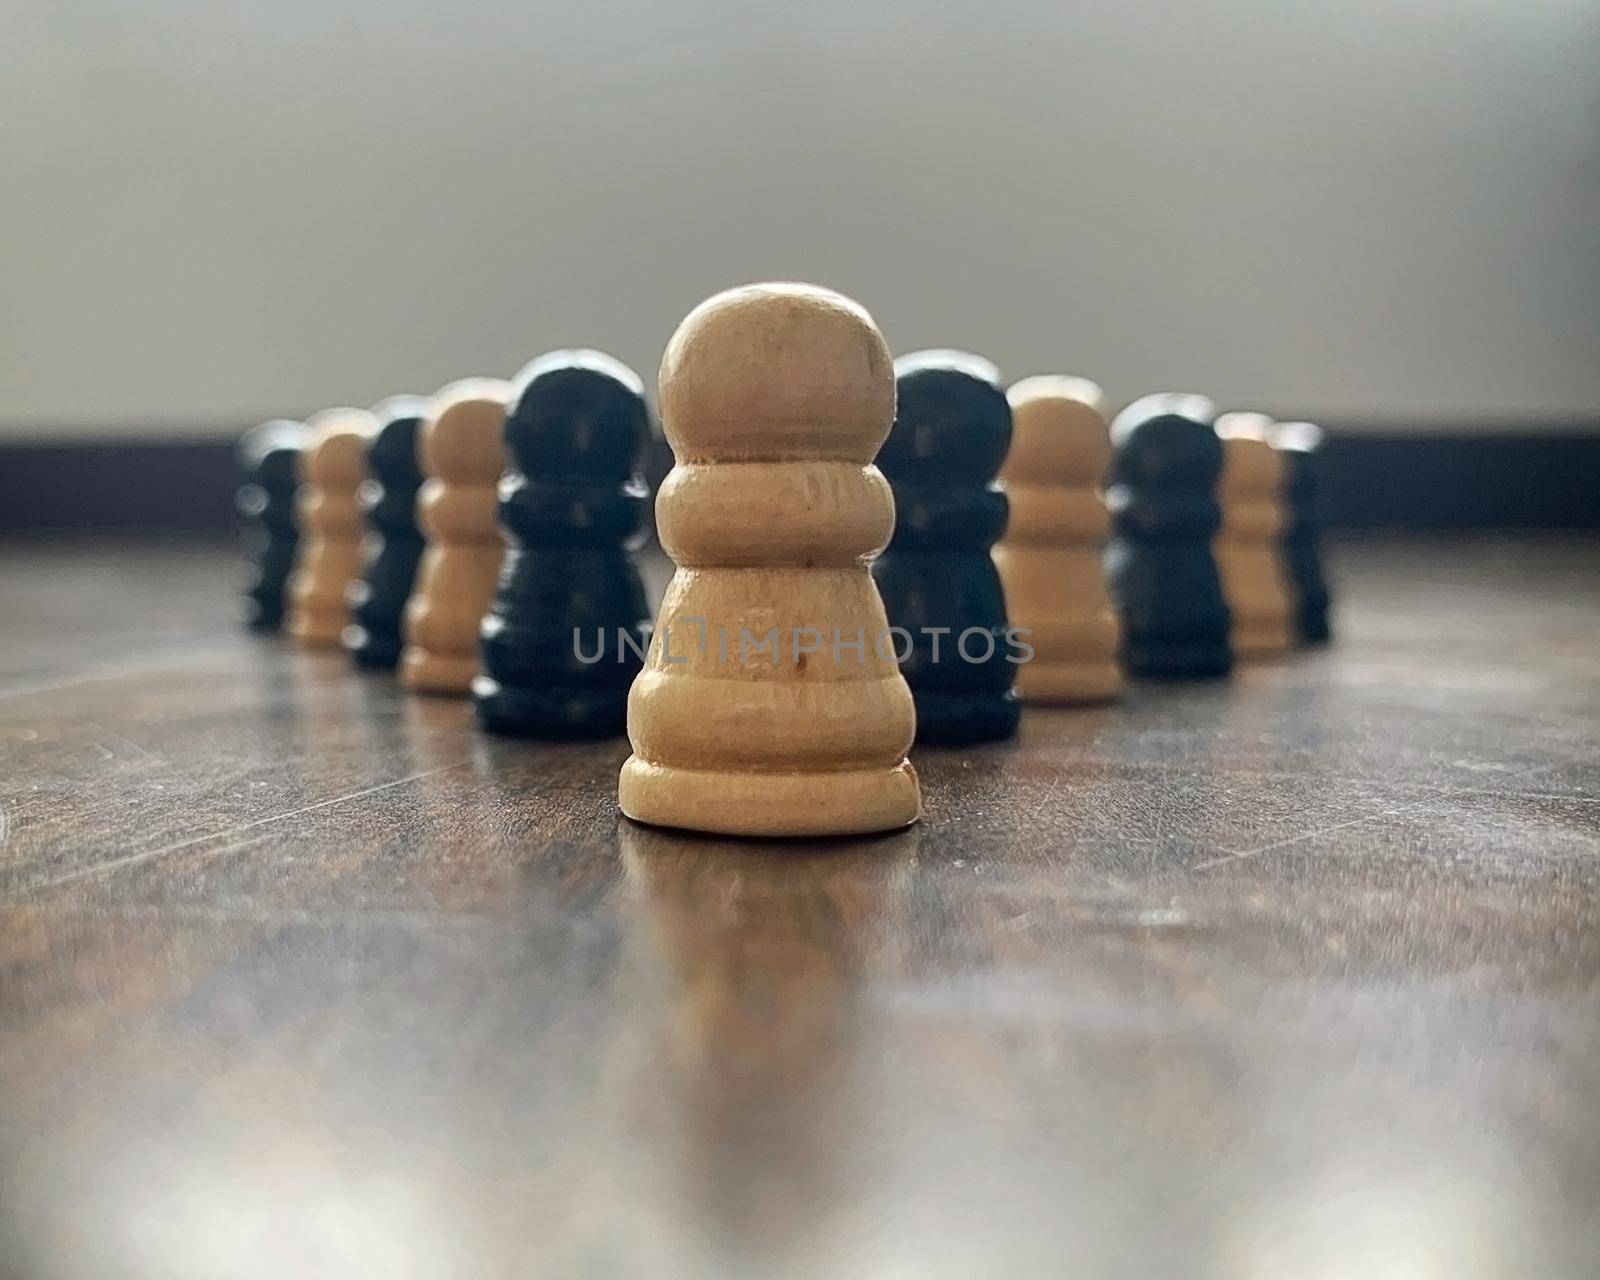 Leader with his team concept with chess pawn lining up before the leader. Leadership concept